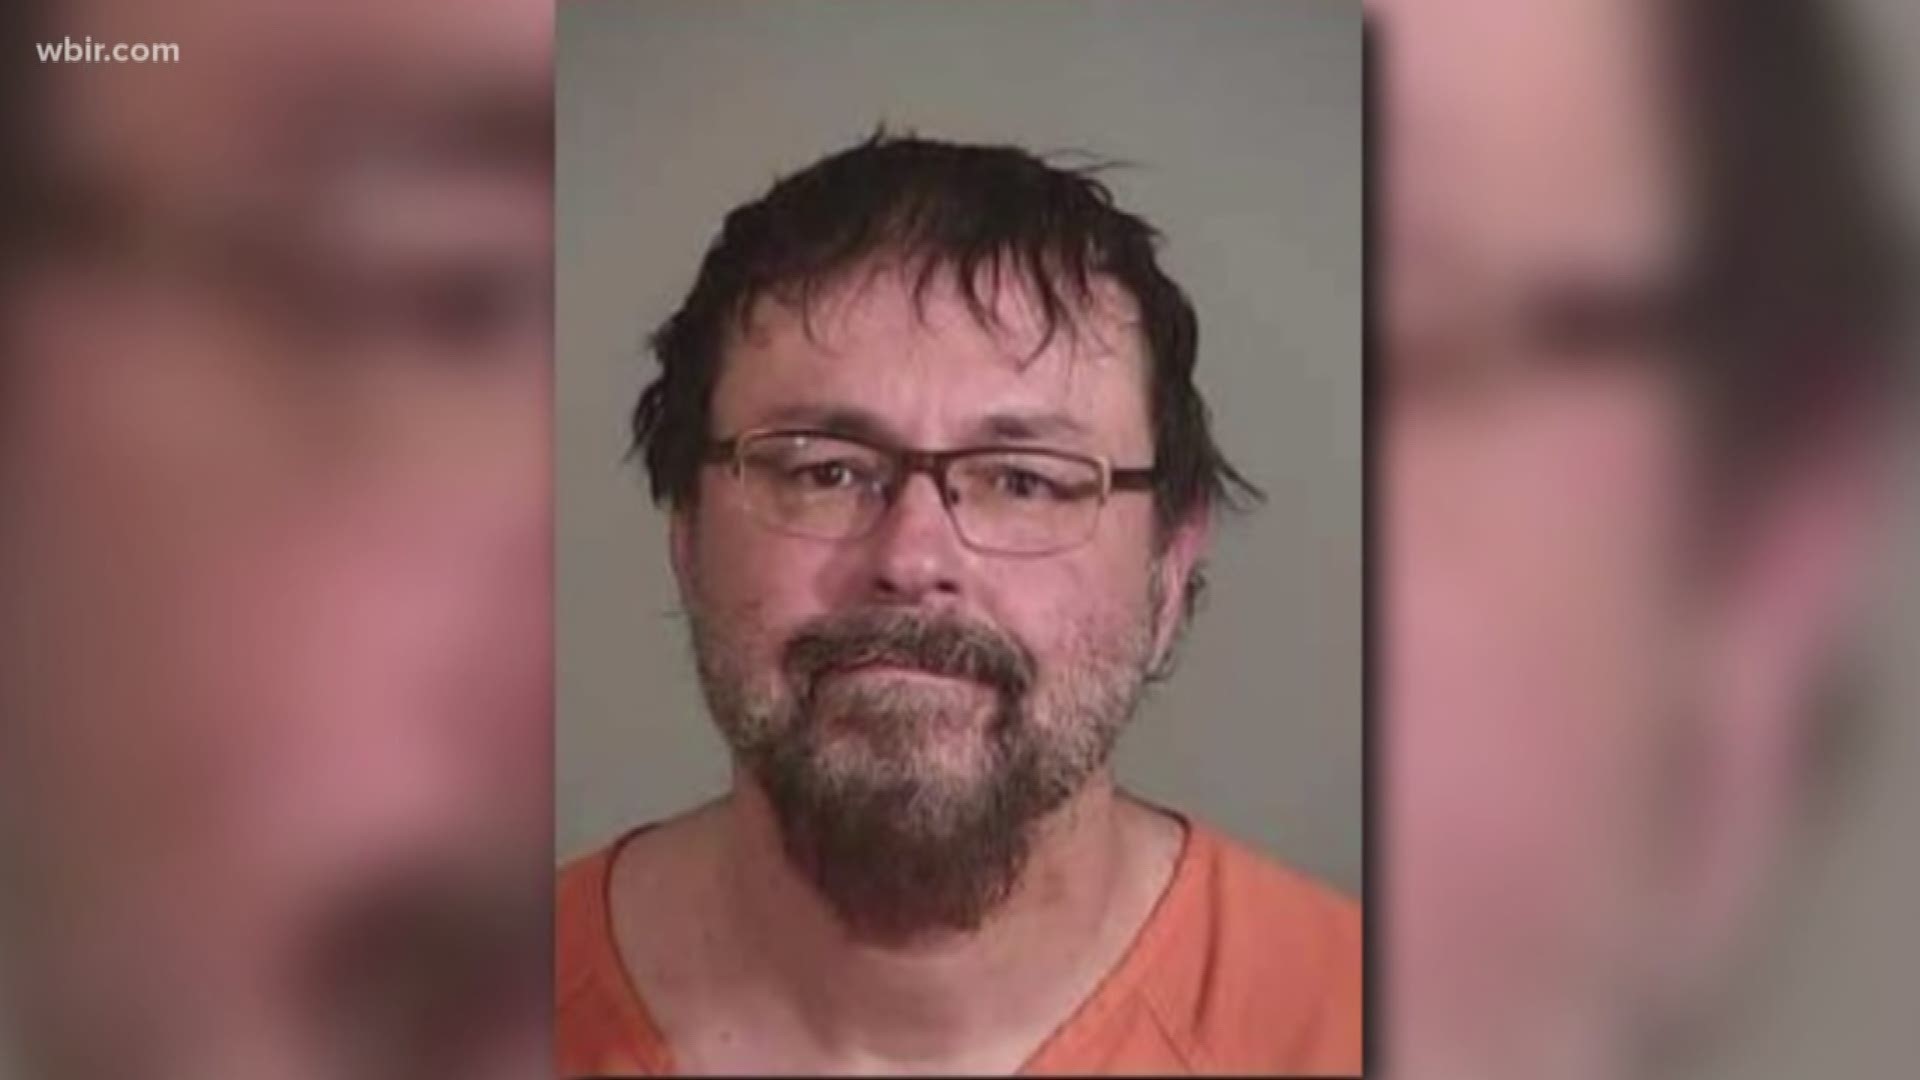 A former Middle Tennessee teacher is sentenced to 20 years in prison after he kidnapped a student and took her across the country.